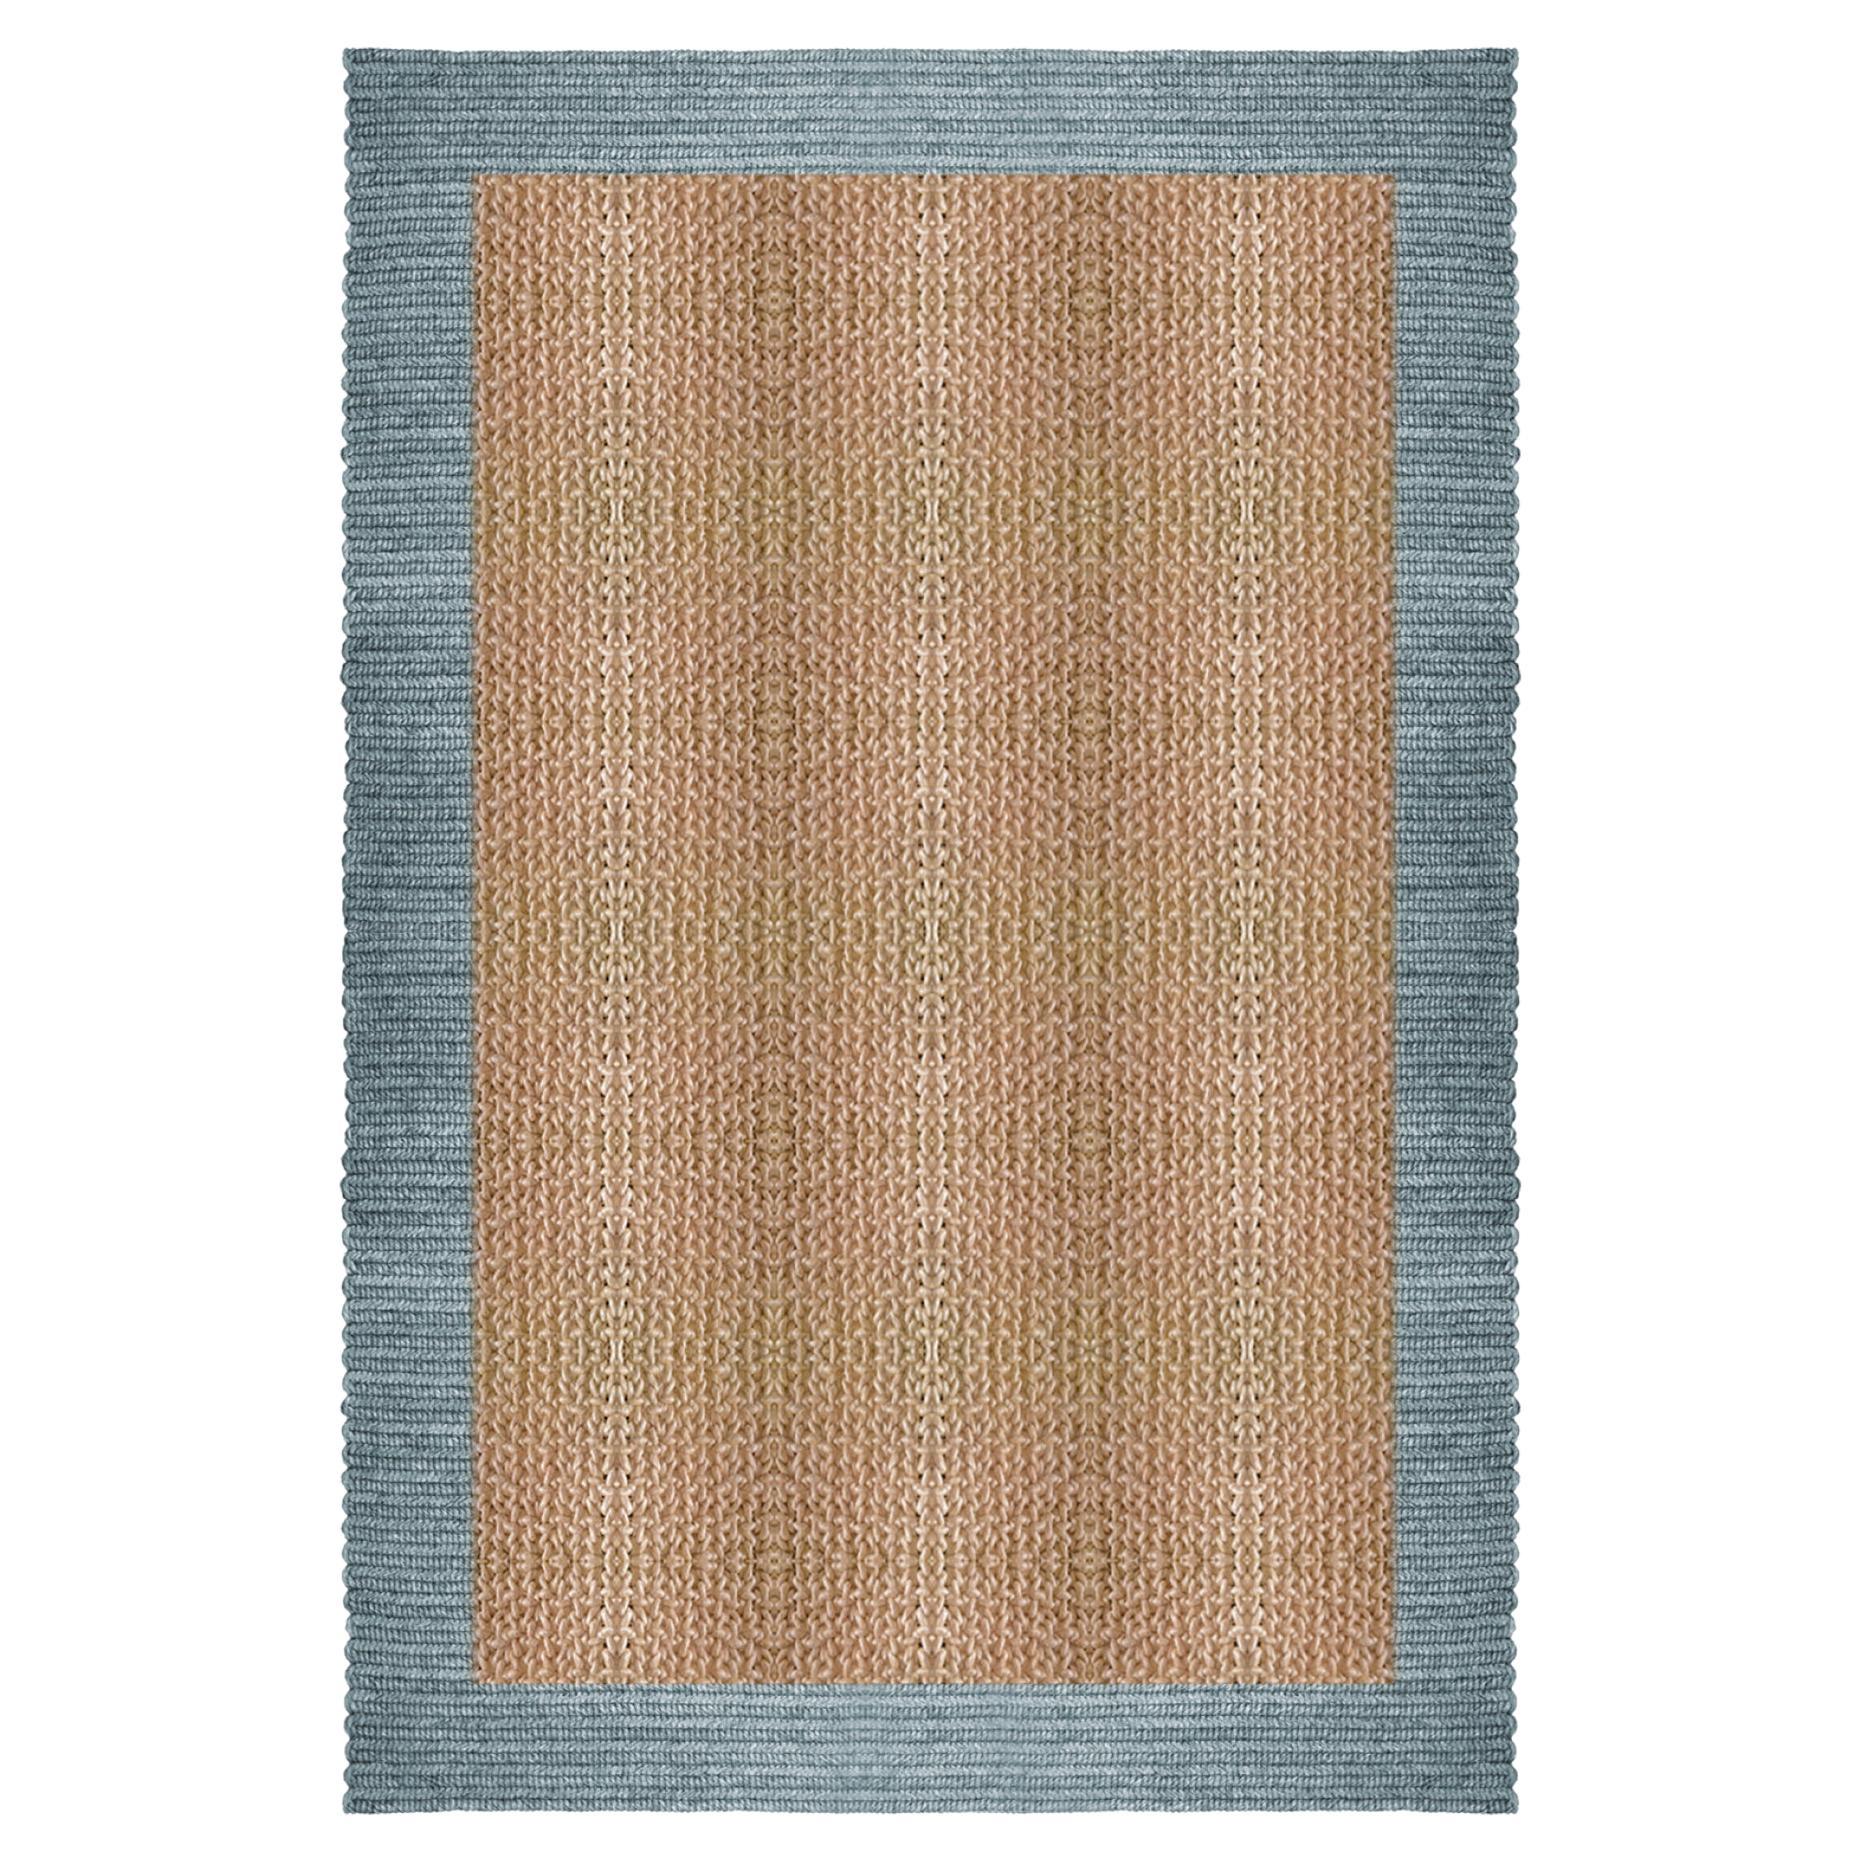 'Nap Duo' Rug in Abaca, by Claire Vos for Musett Design For Sale